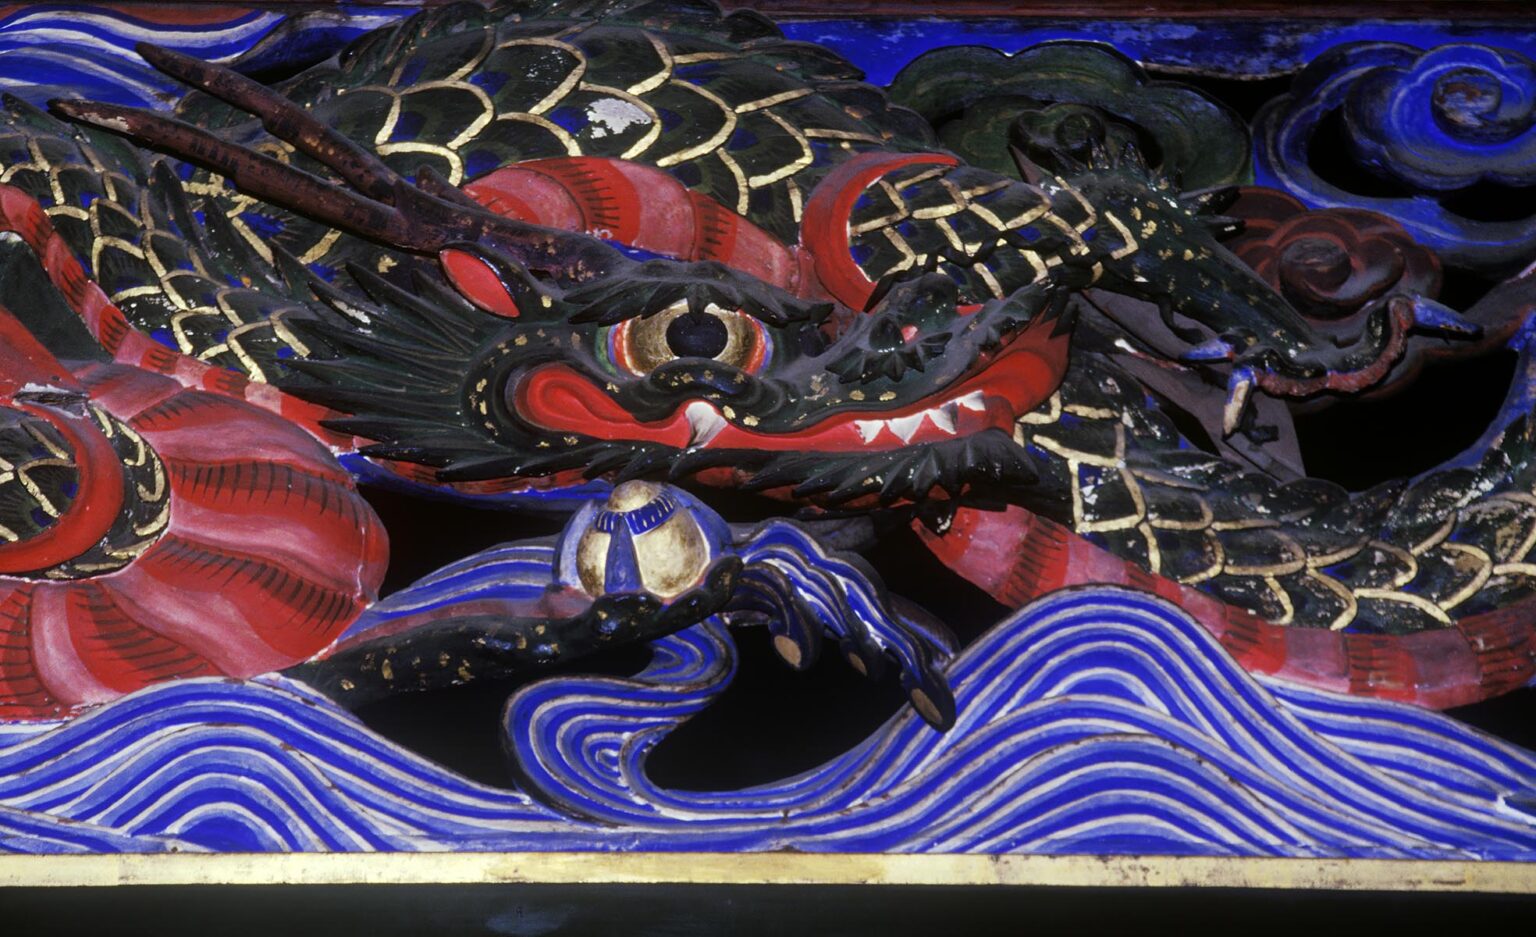 Carved and painted WOODEN DRAGON decorates the exterior of a BUDDHIST TEMPLE - KURASHIKI, JAPAN